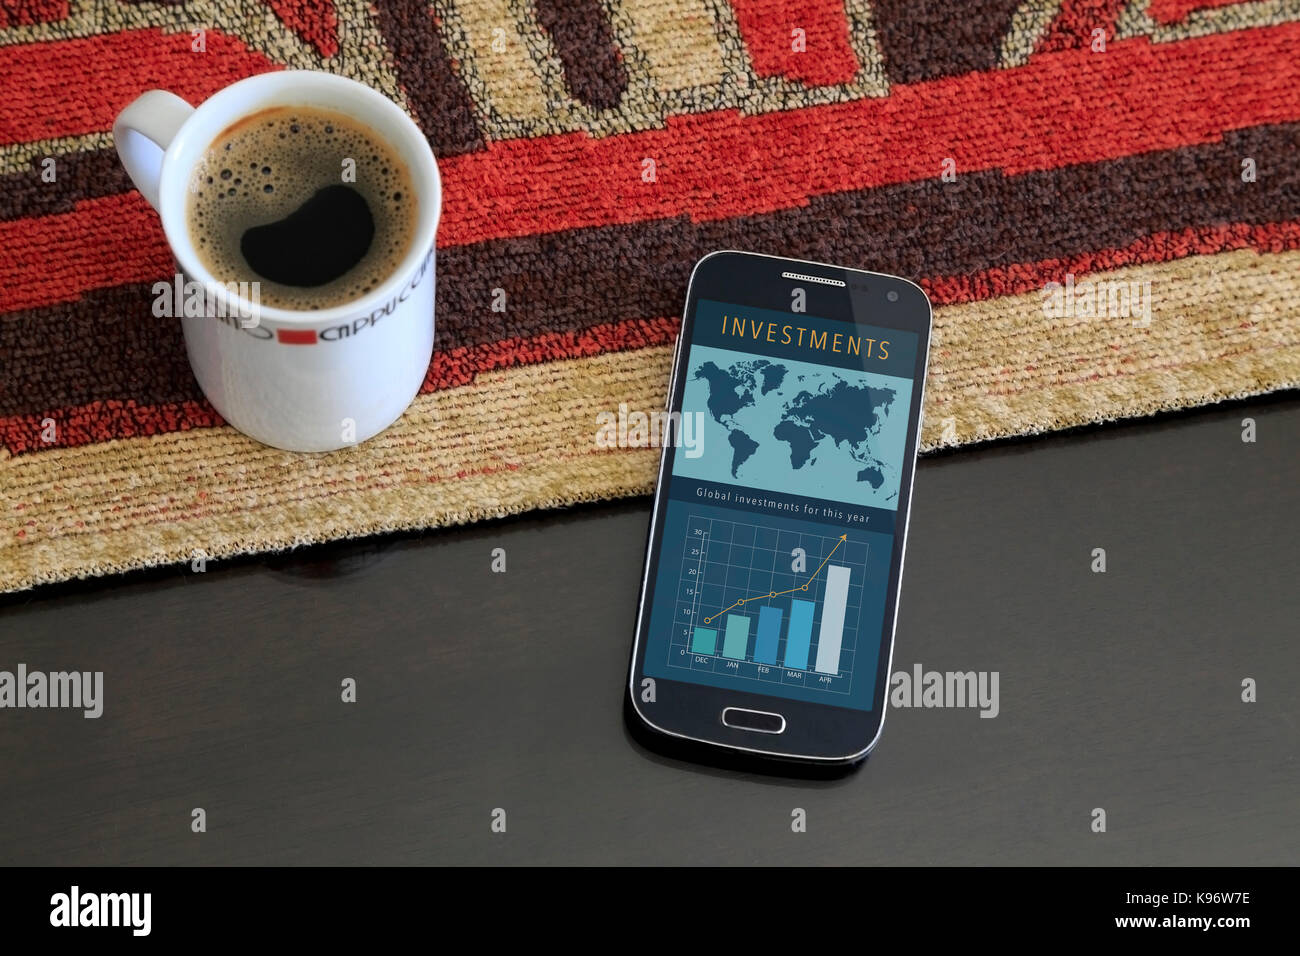 Smartphone with a investment web page on the screen. Beside a cup of coffee. Marketing, app, web page, app. Stock Photo